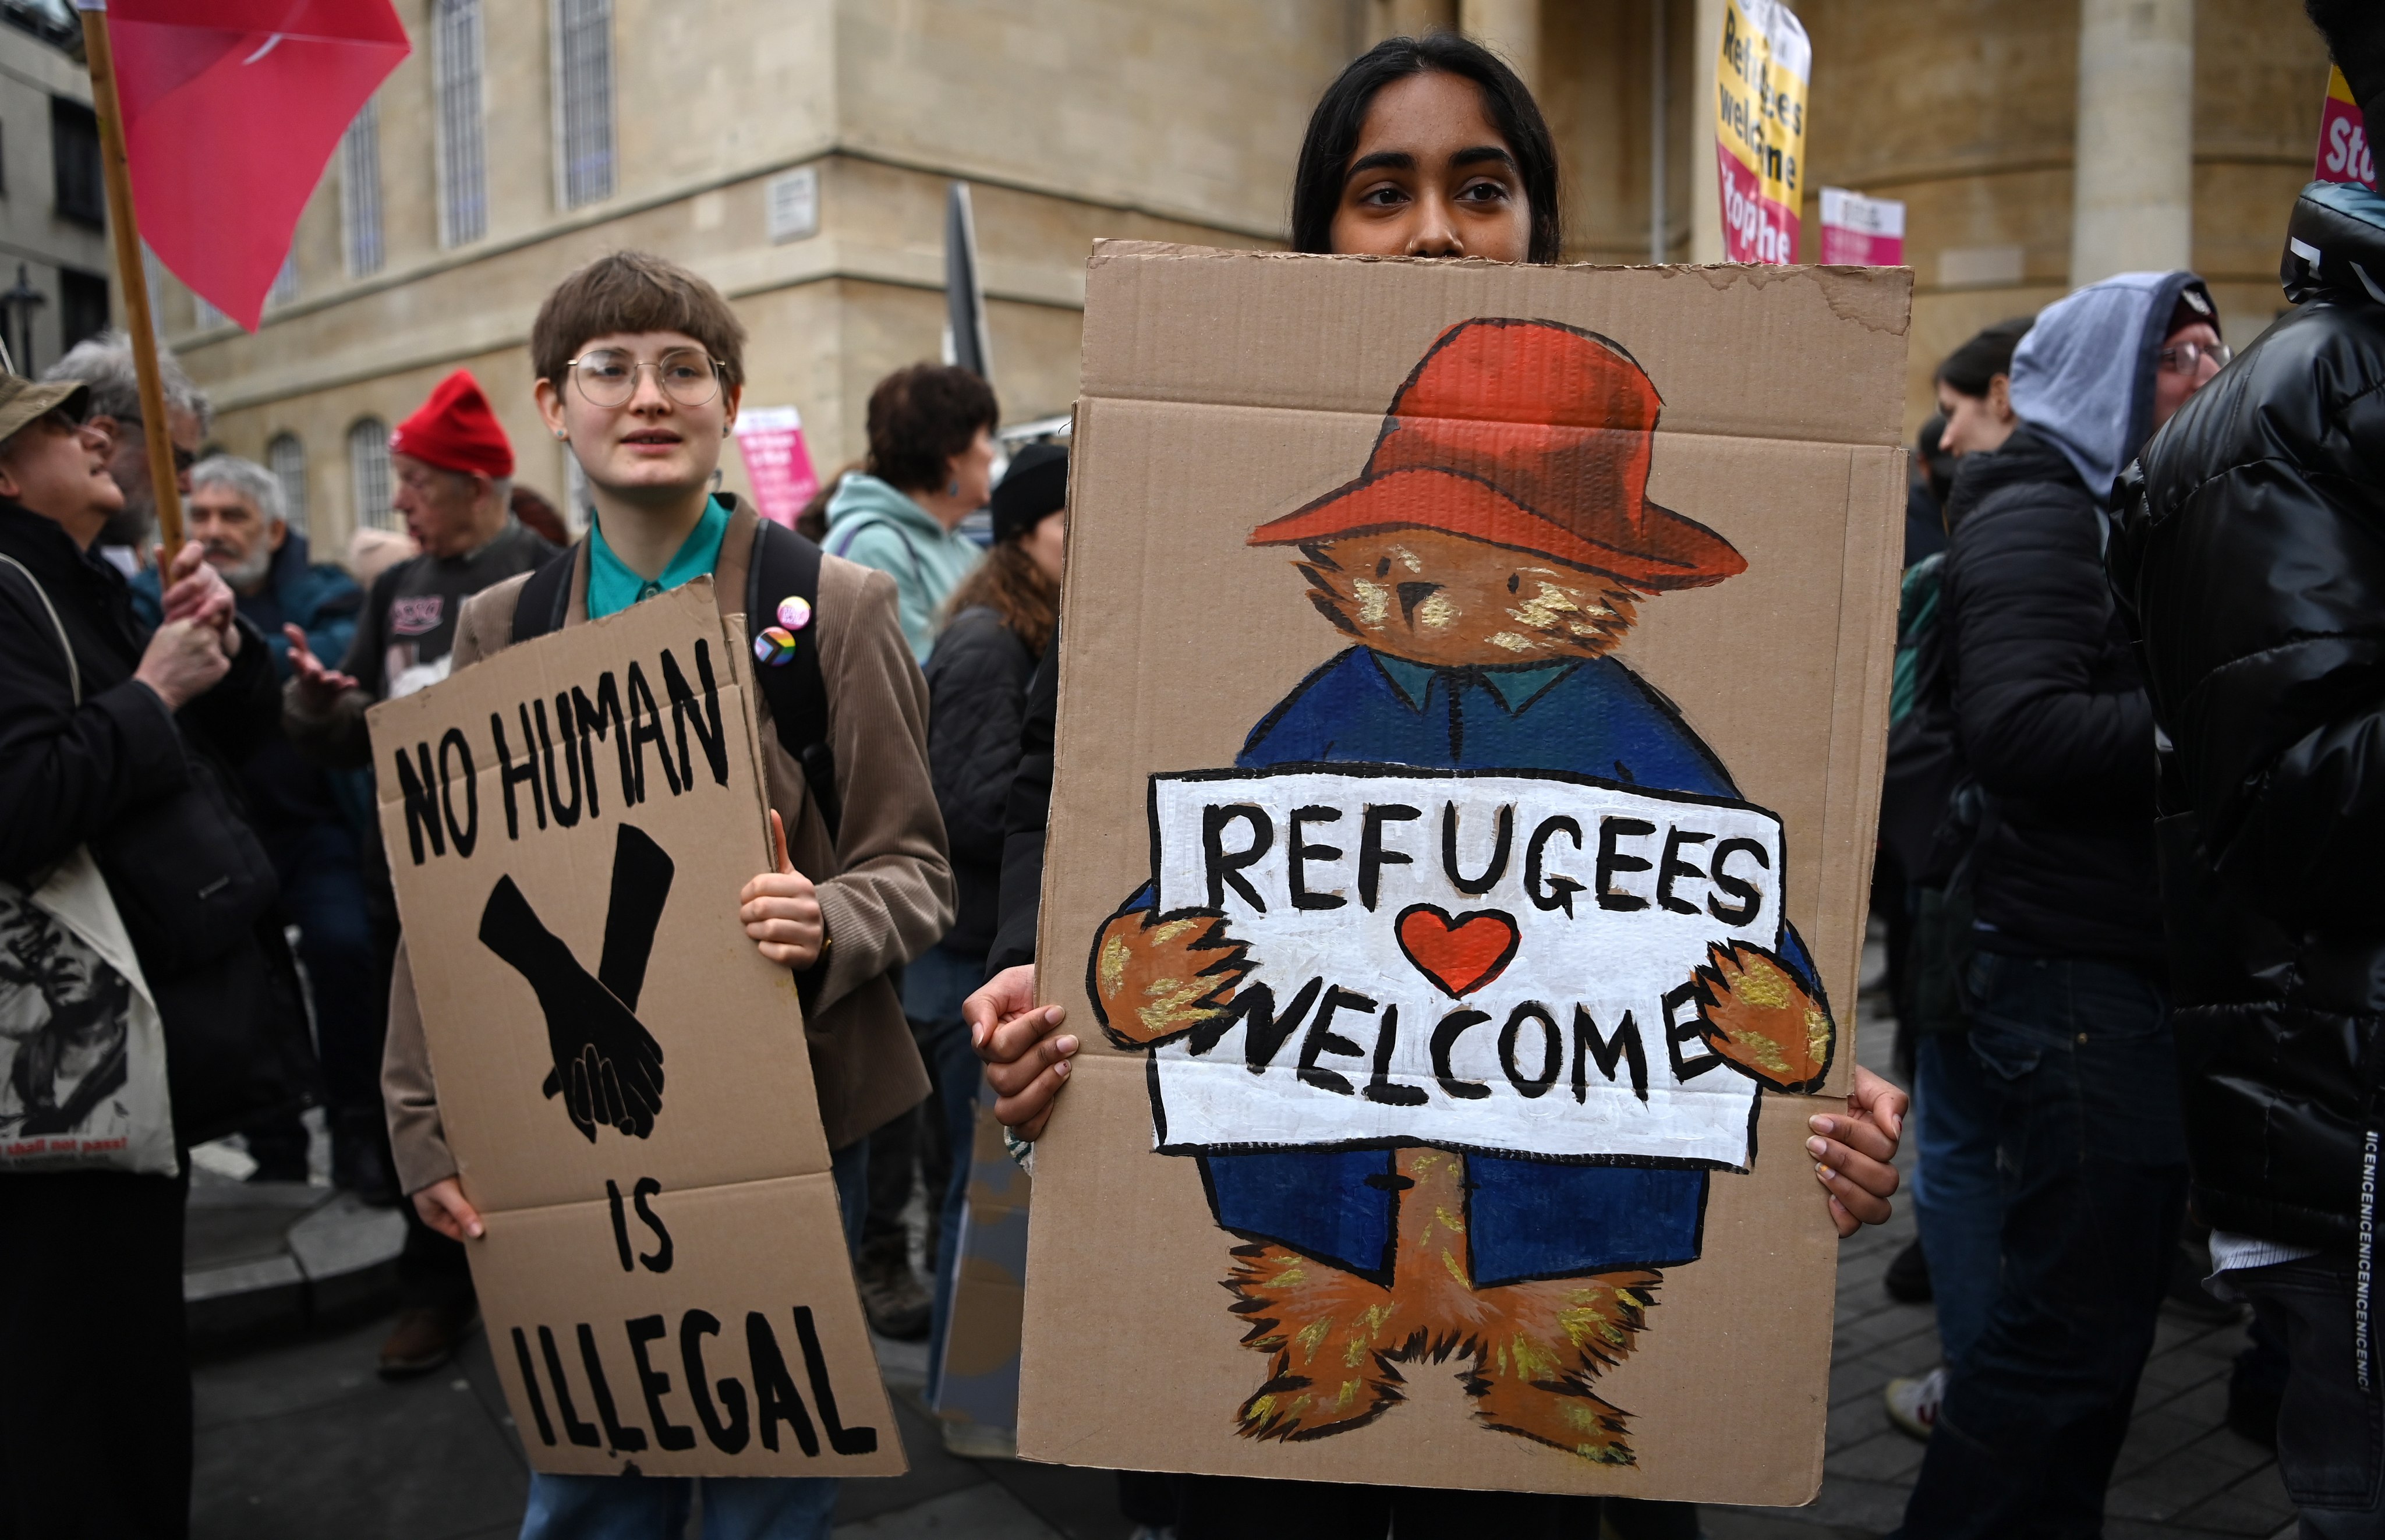 Protesters demonstrate against the UK government’s new Illegal Migration bill during an anti-racism demonstration in London on Saturday. Photo: EPA-EFE